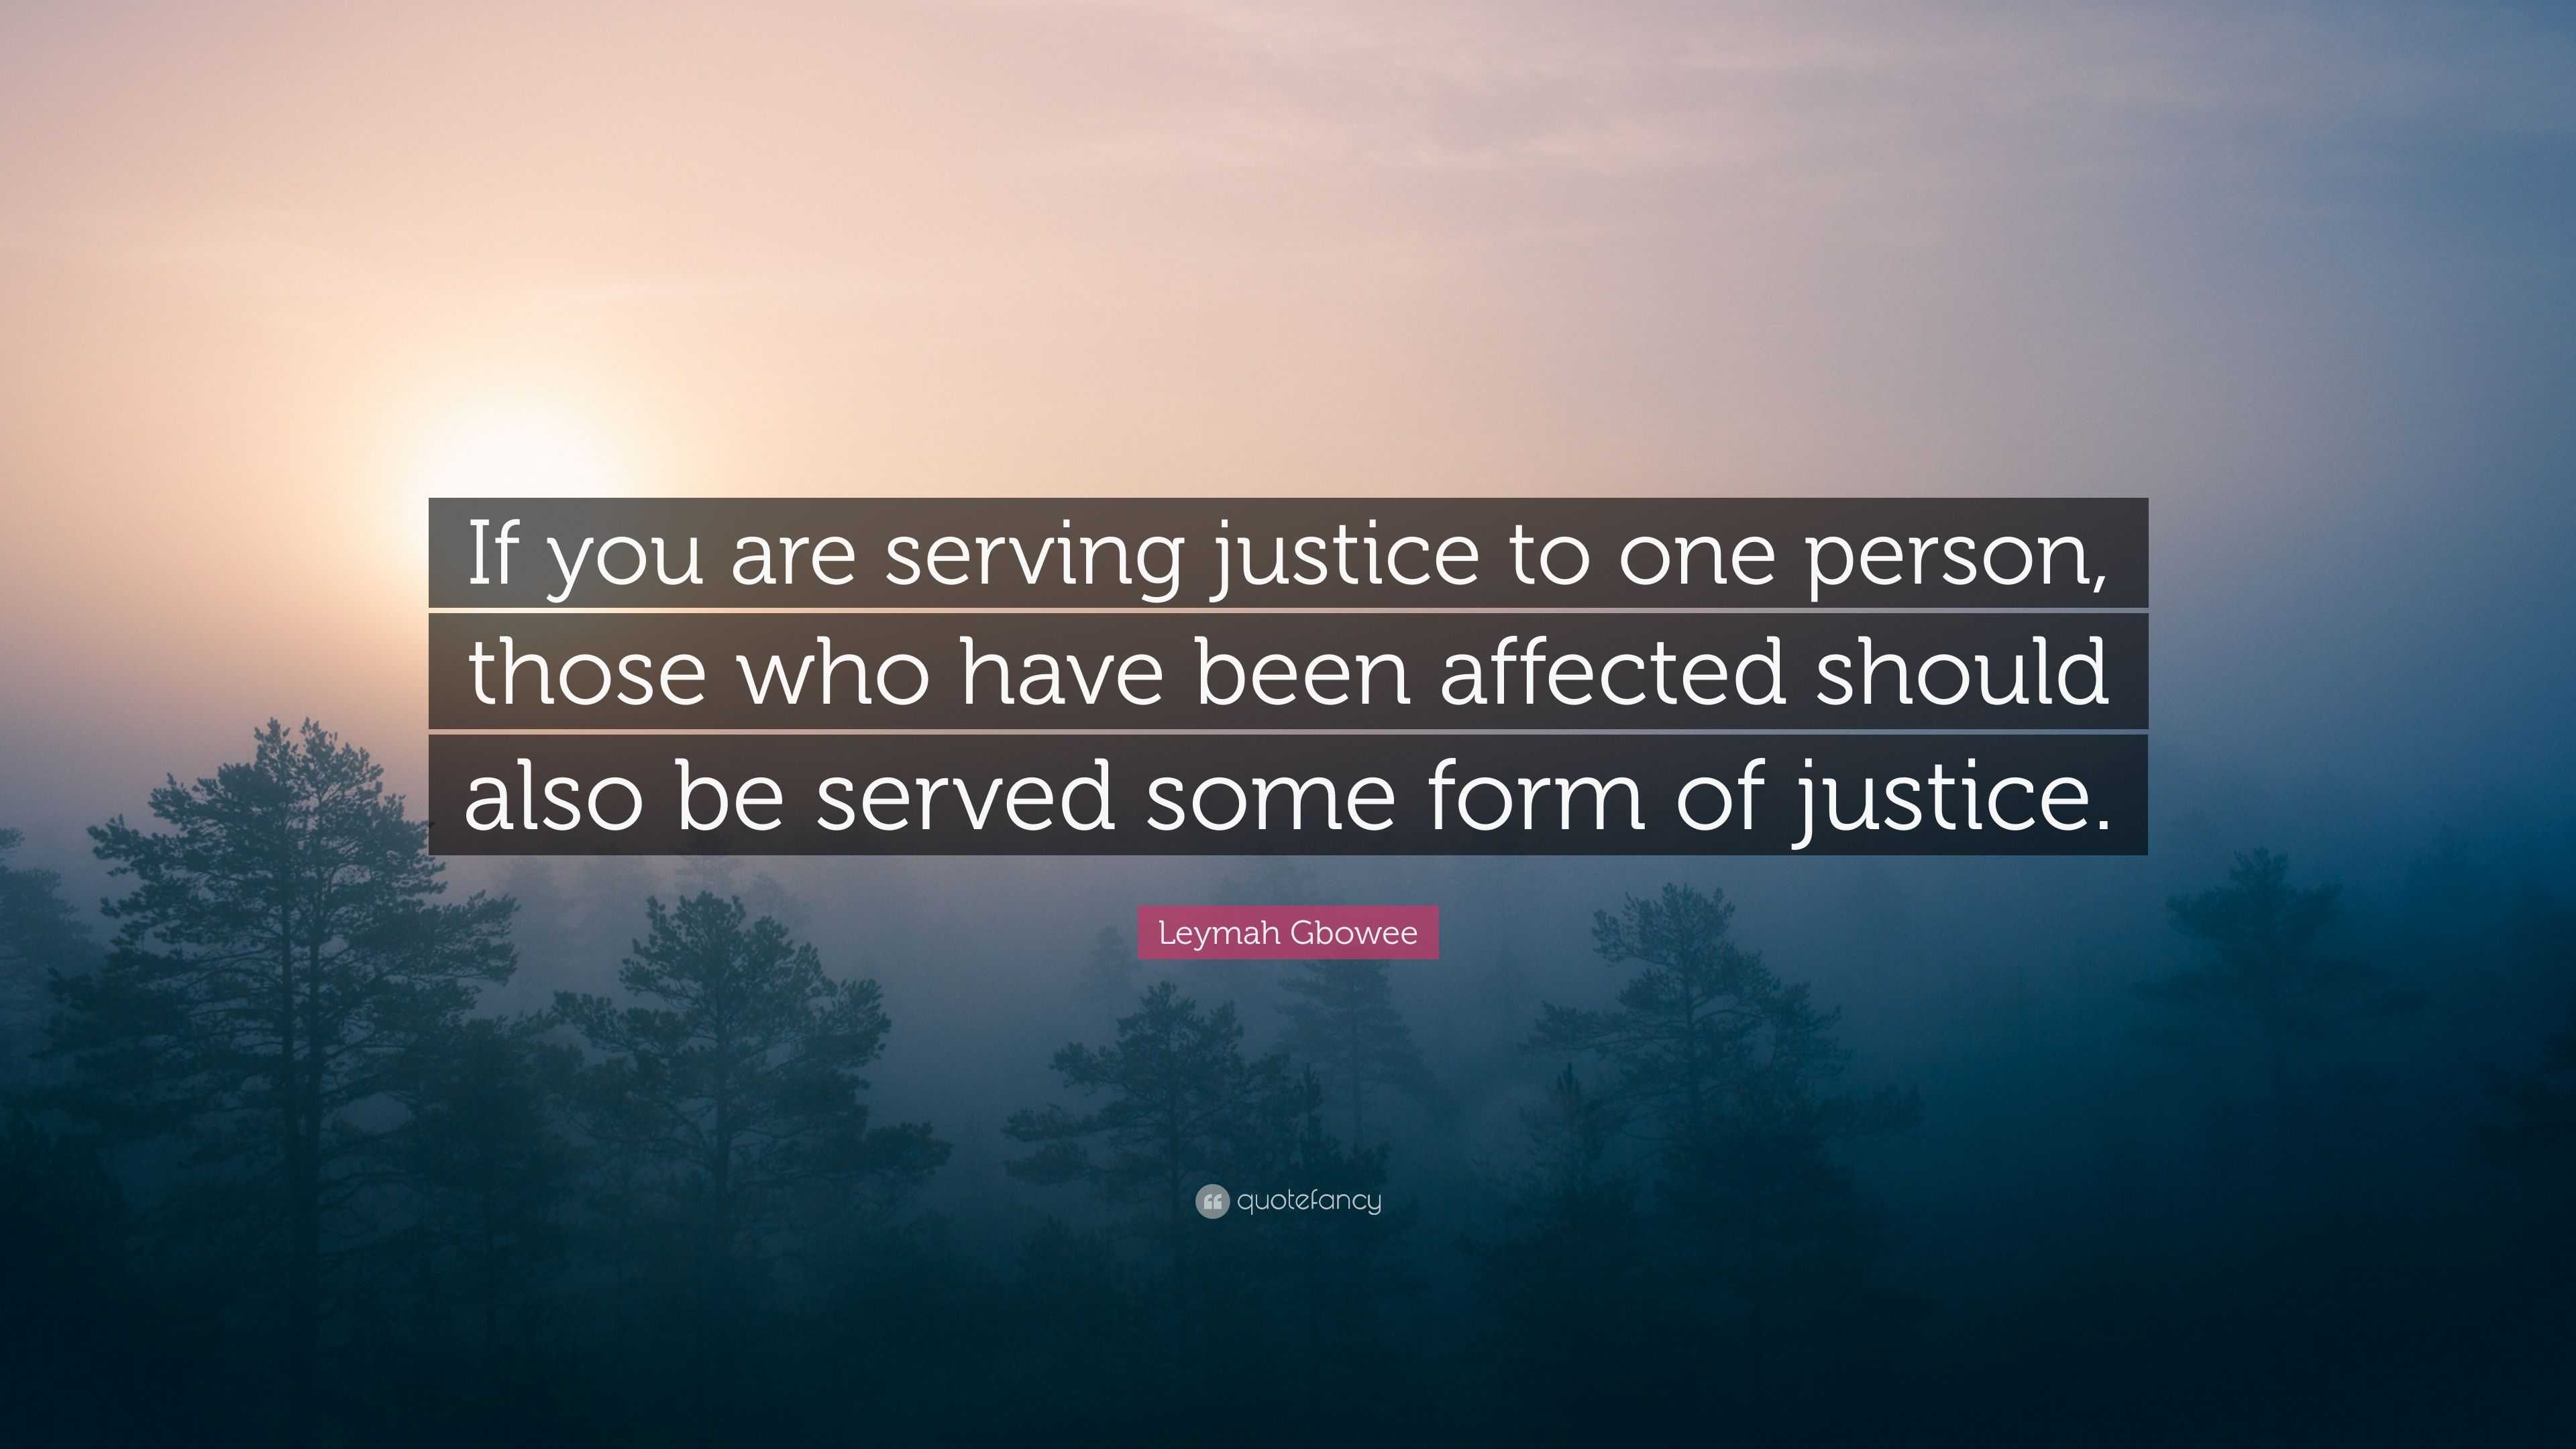 Leymah Gbowee “If you are serving justice one person, who have been affected